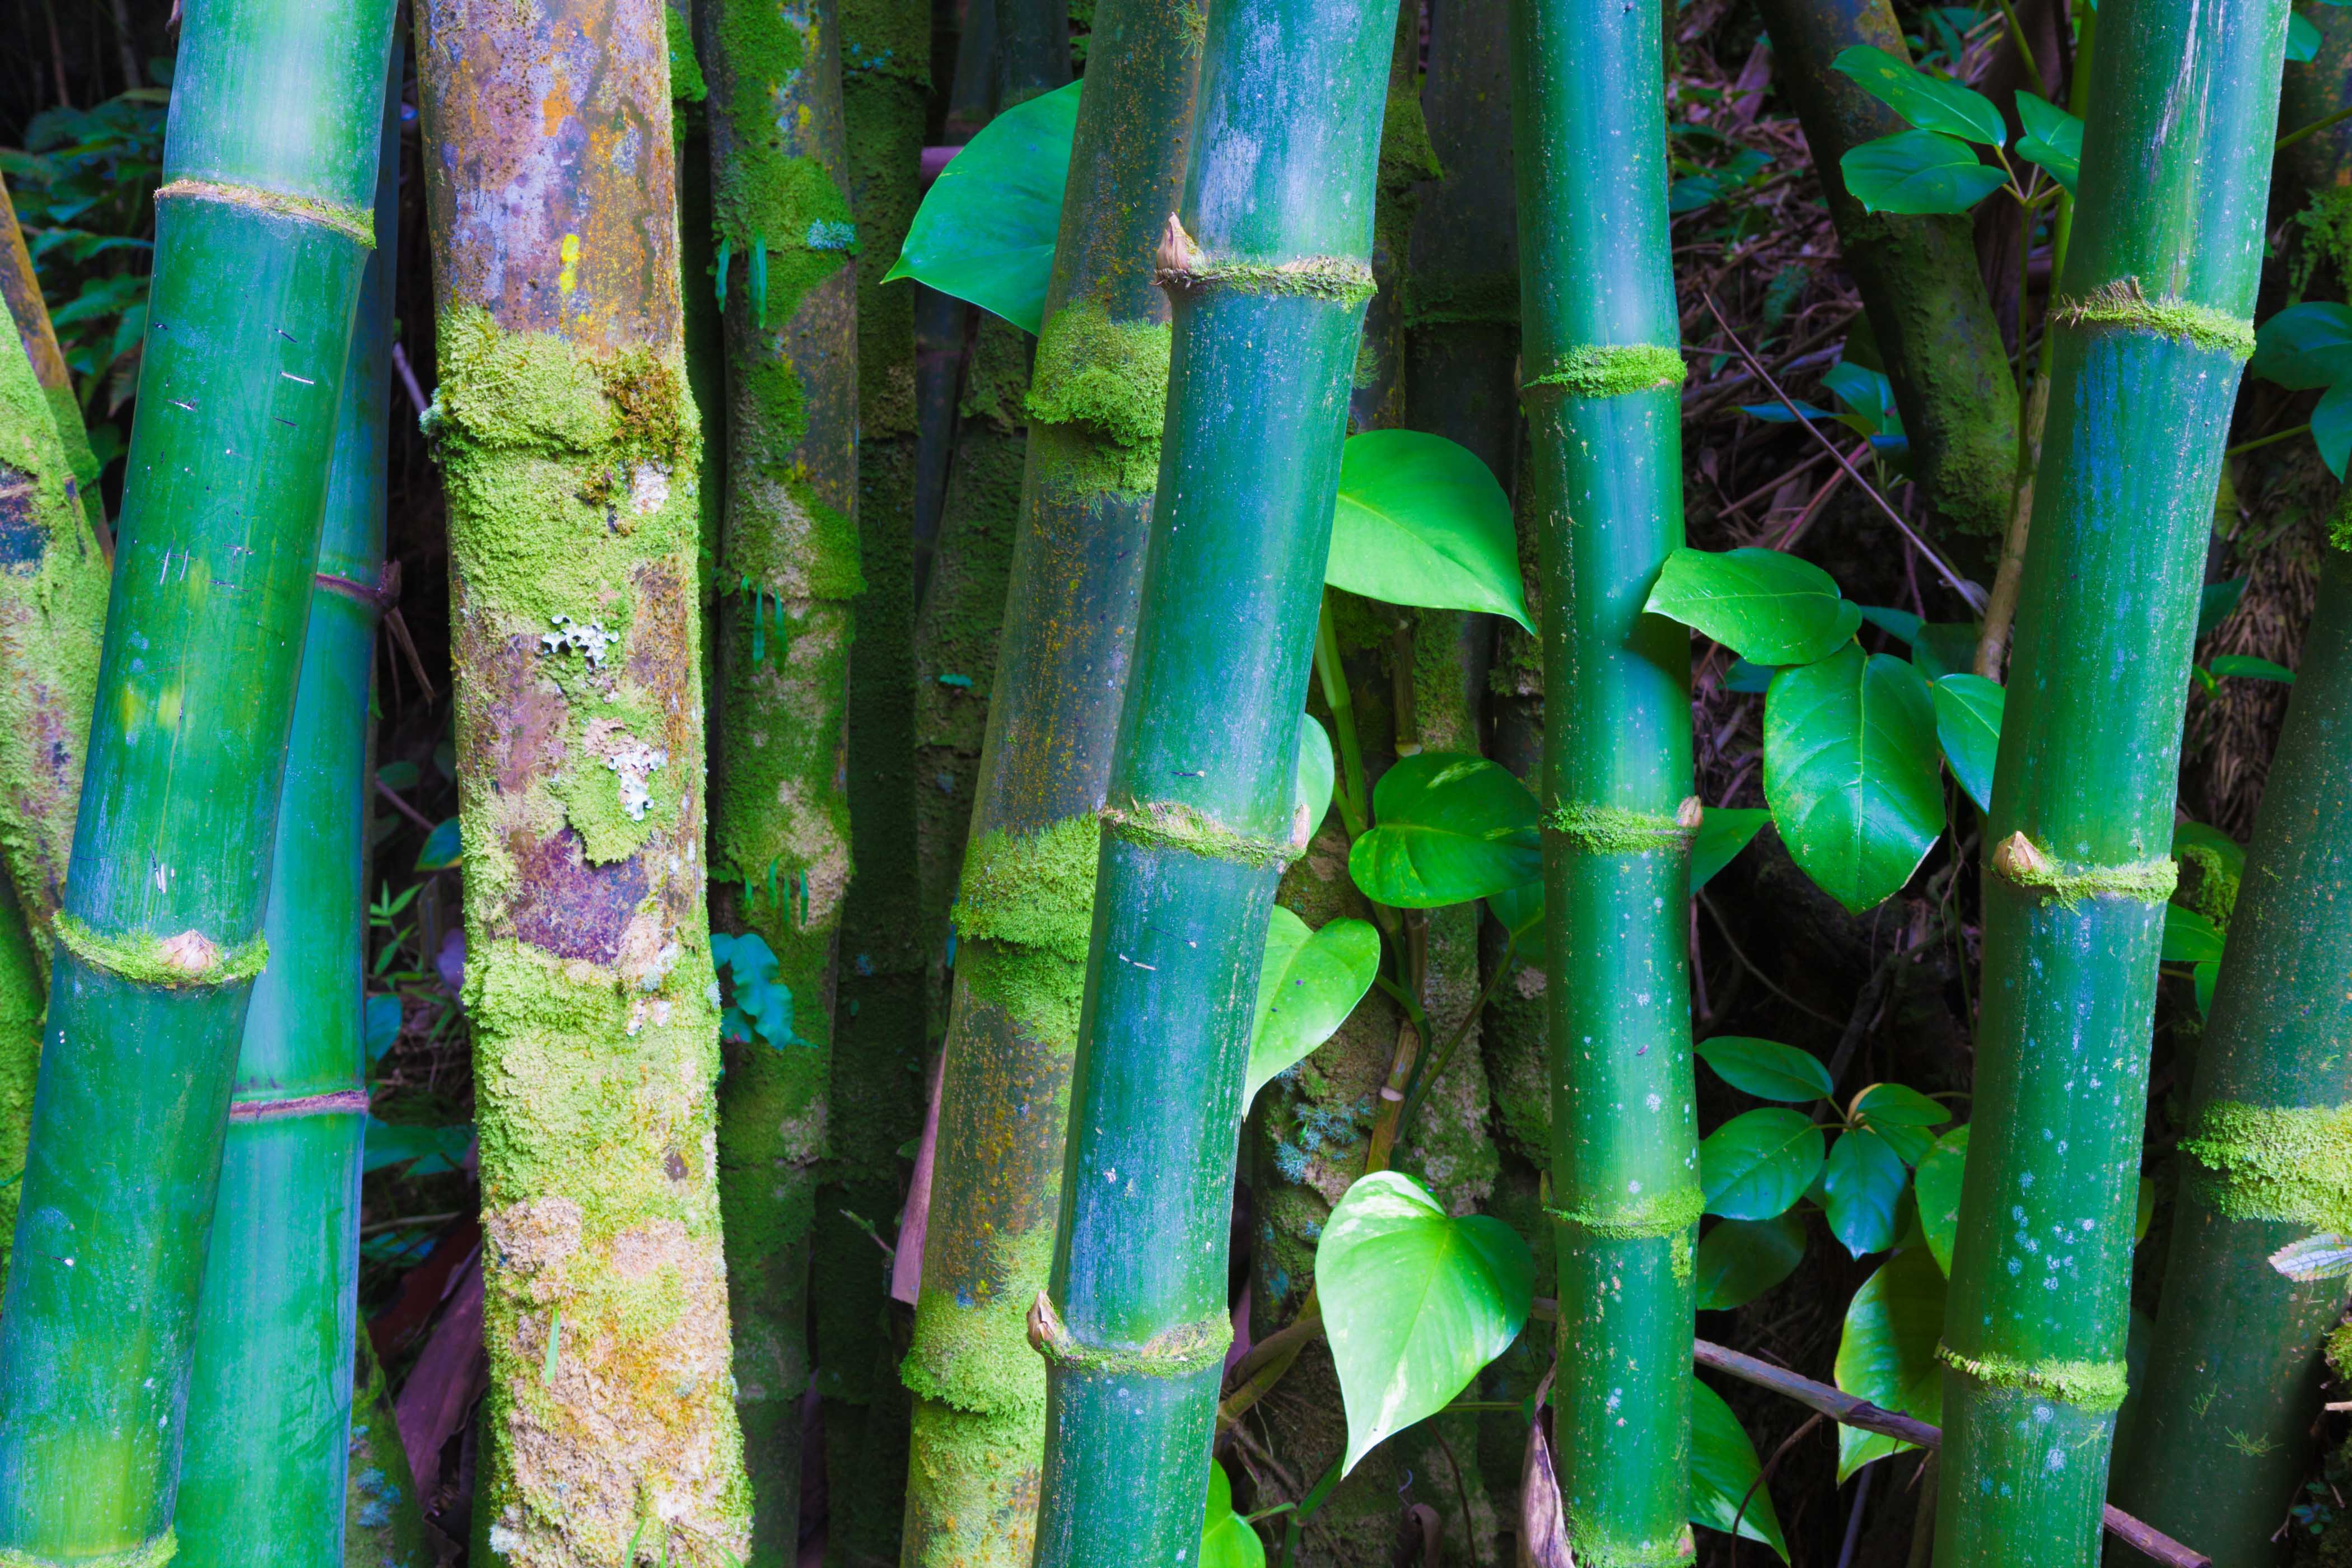 Bamboo forest in Hawaii